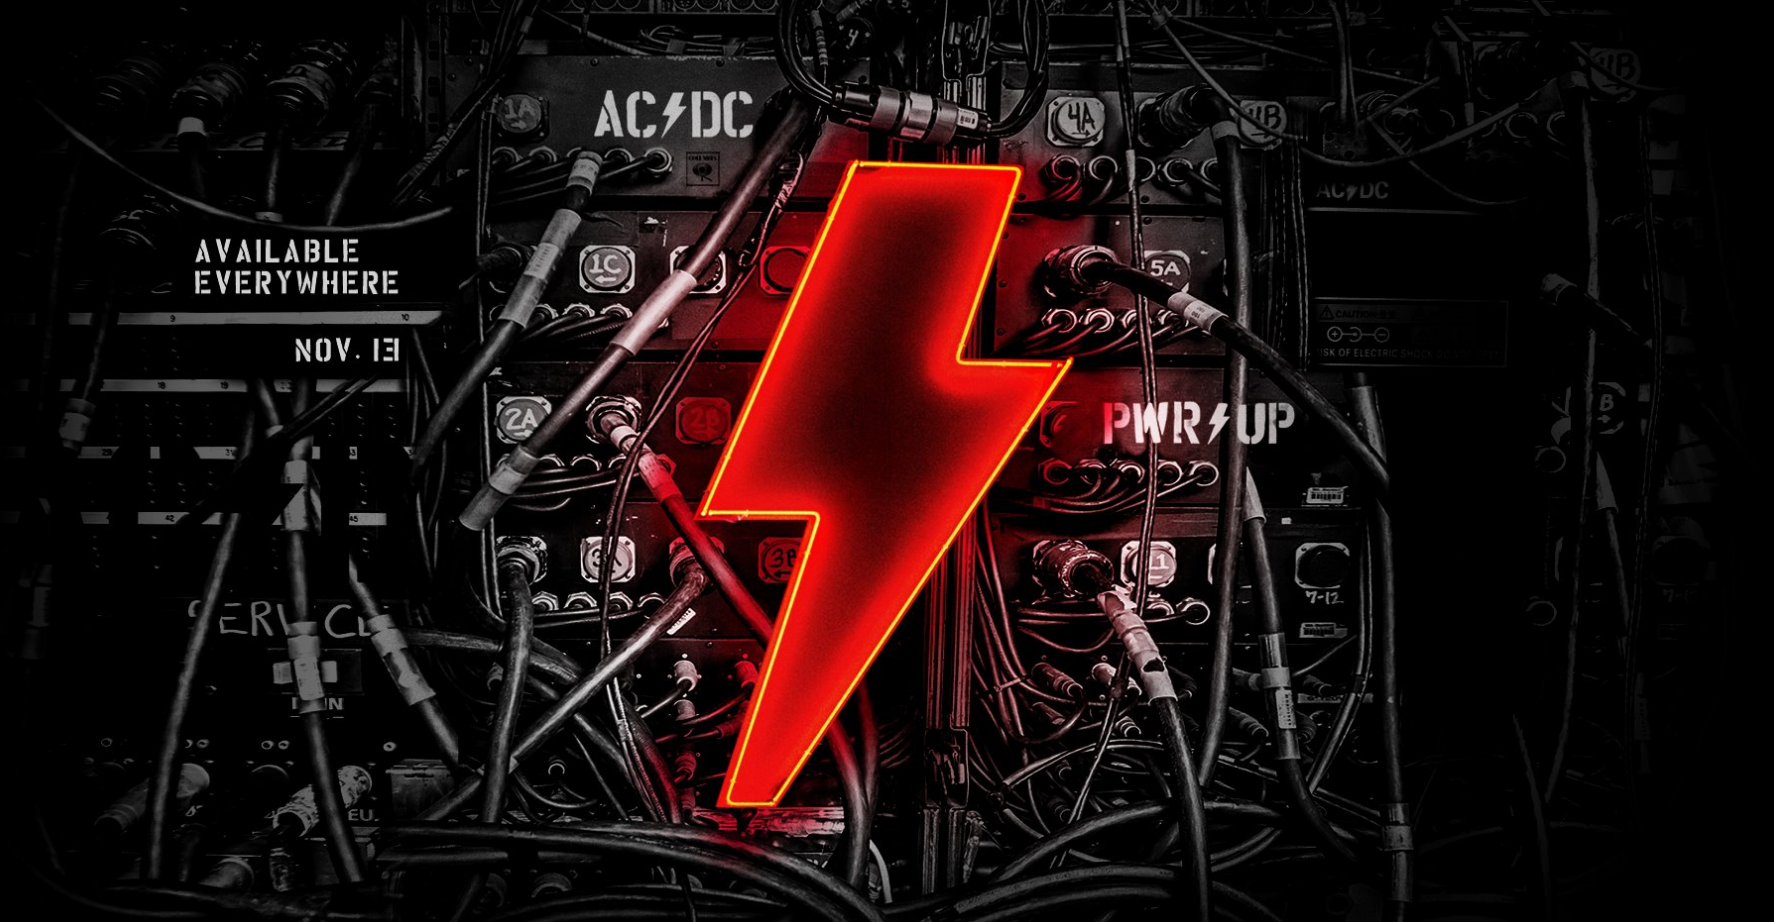 AC/DC Announce New Album 'POWER UP' Featuring Classic Lineup, Share